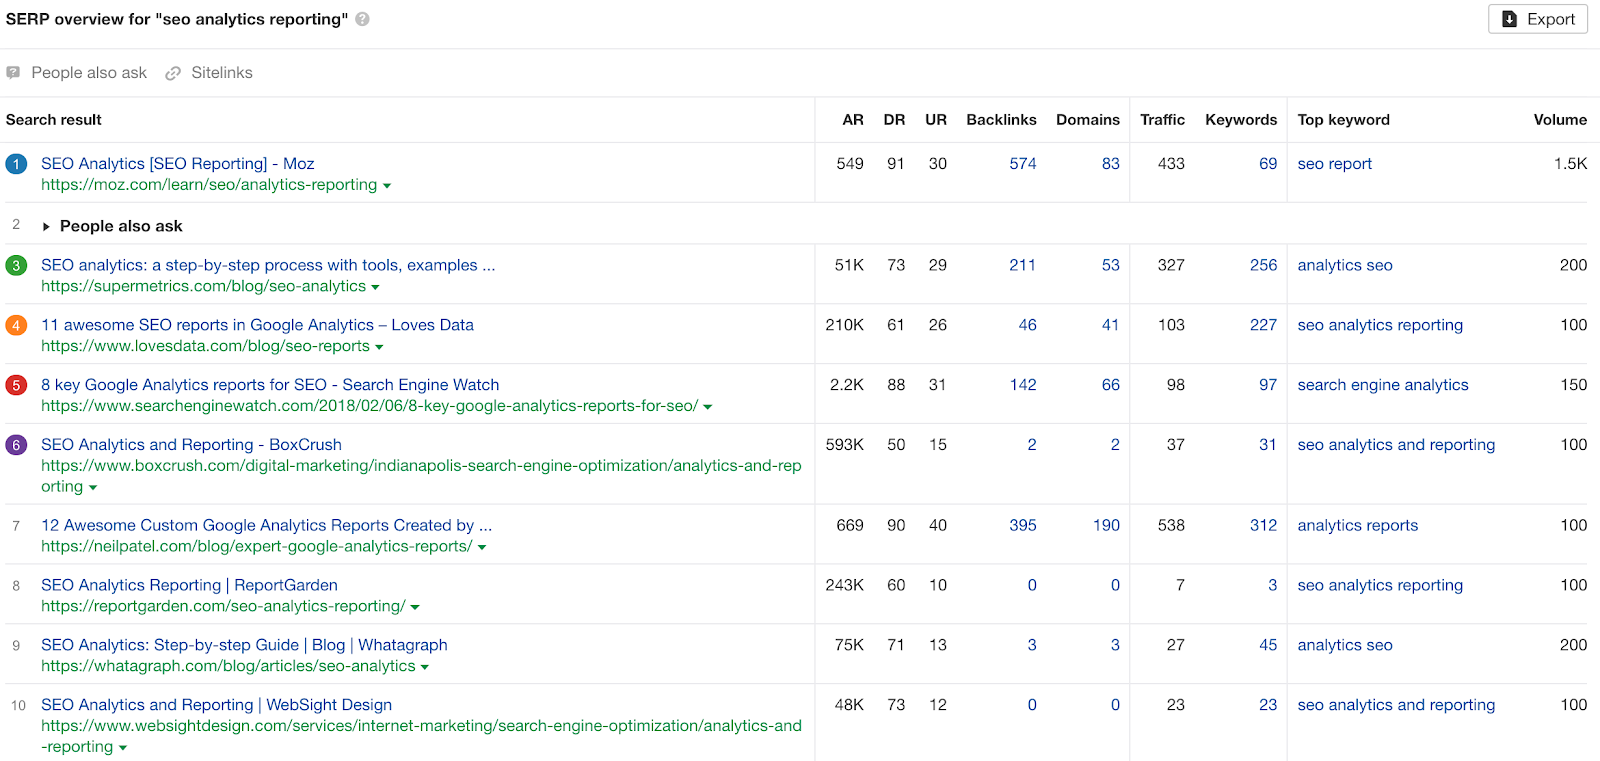 serp overview for "seo analytics reporting" on ahrefs 